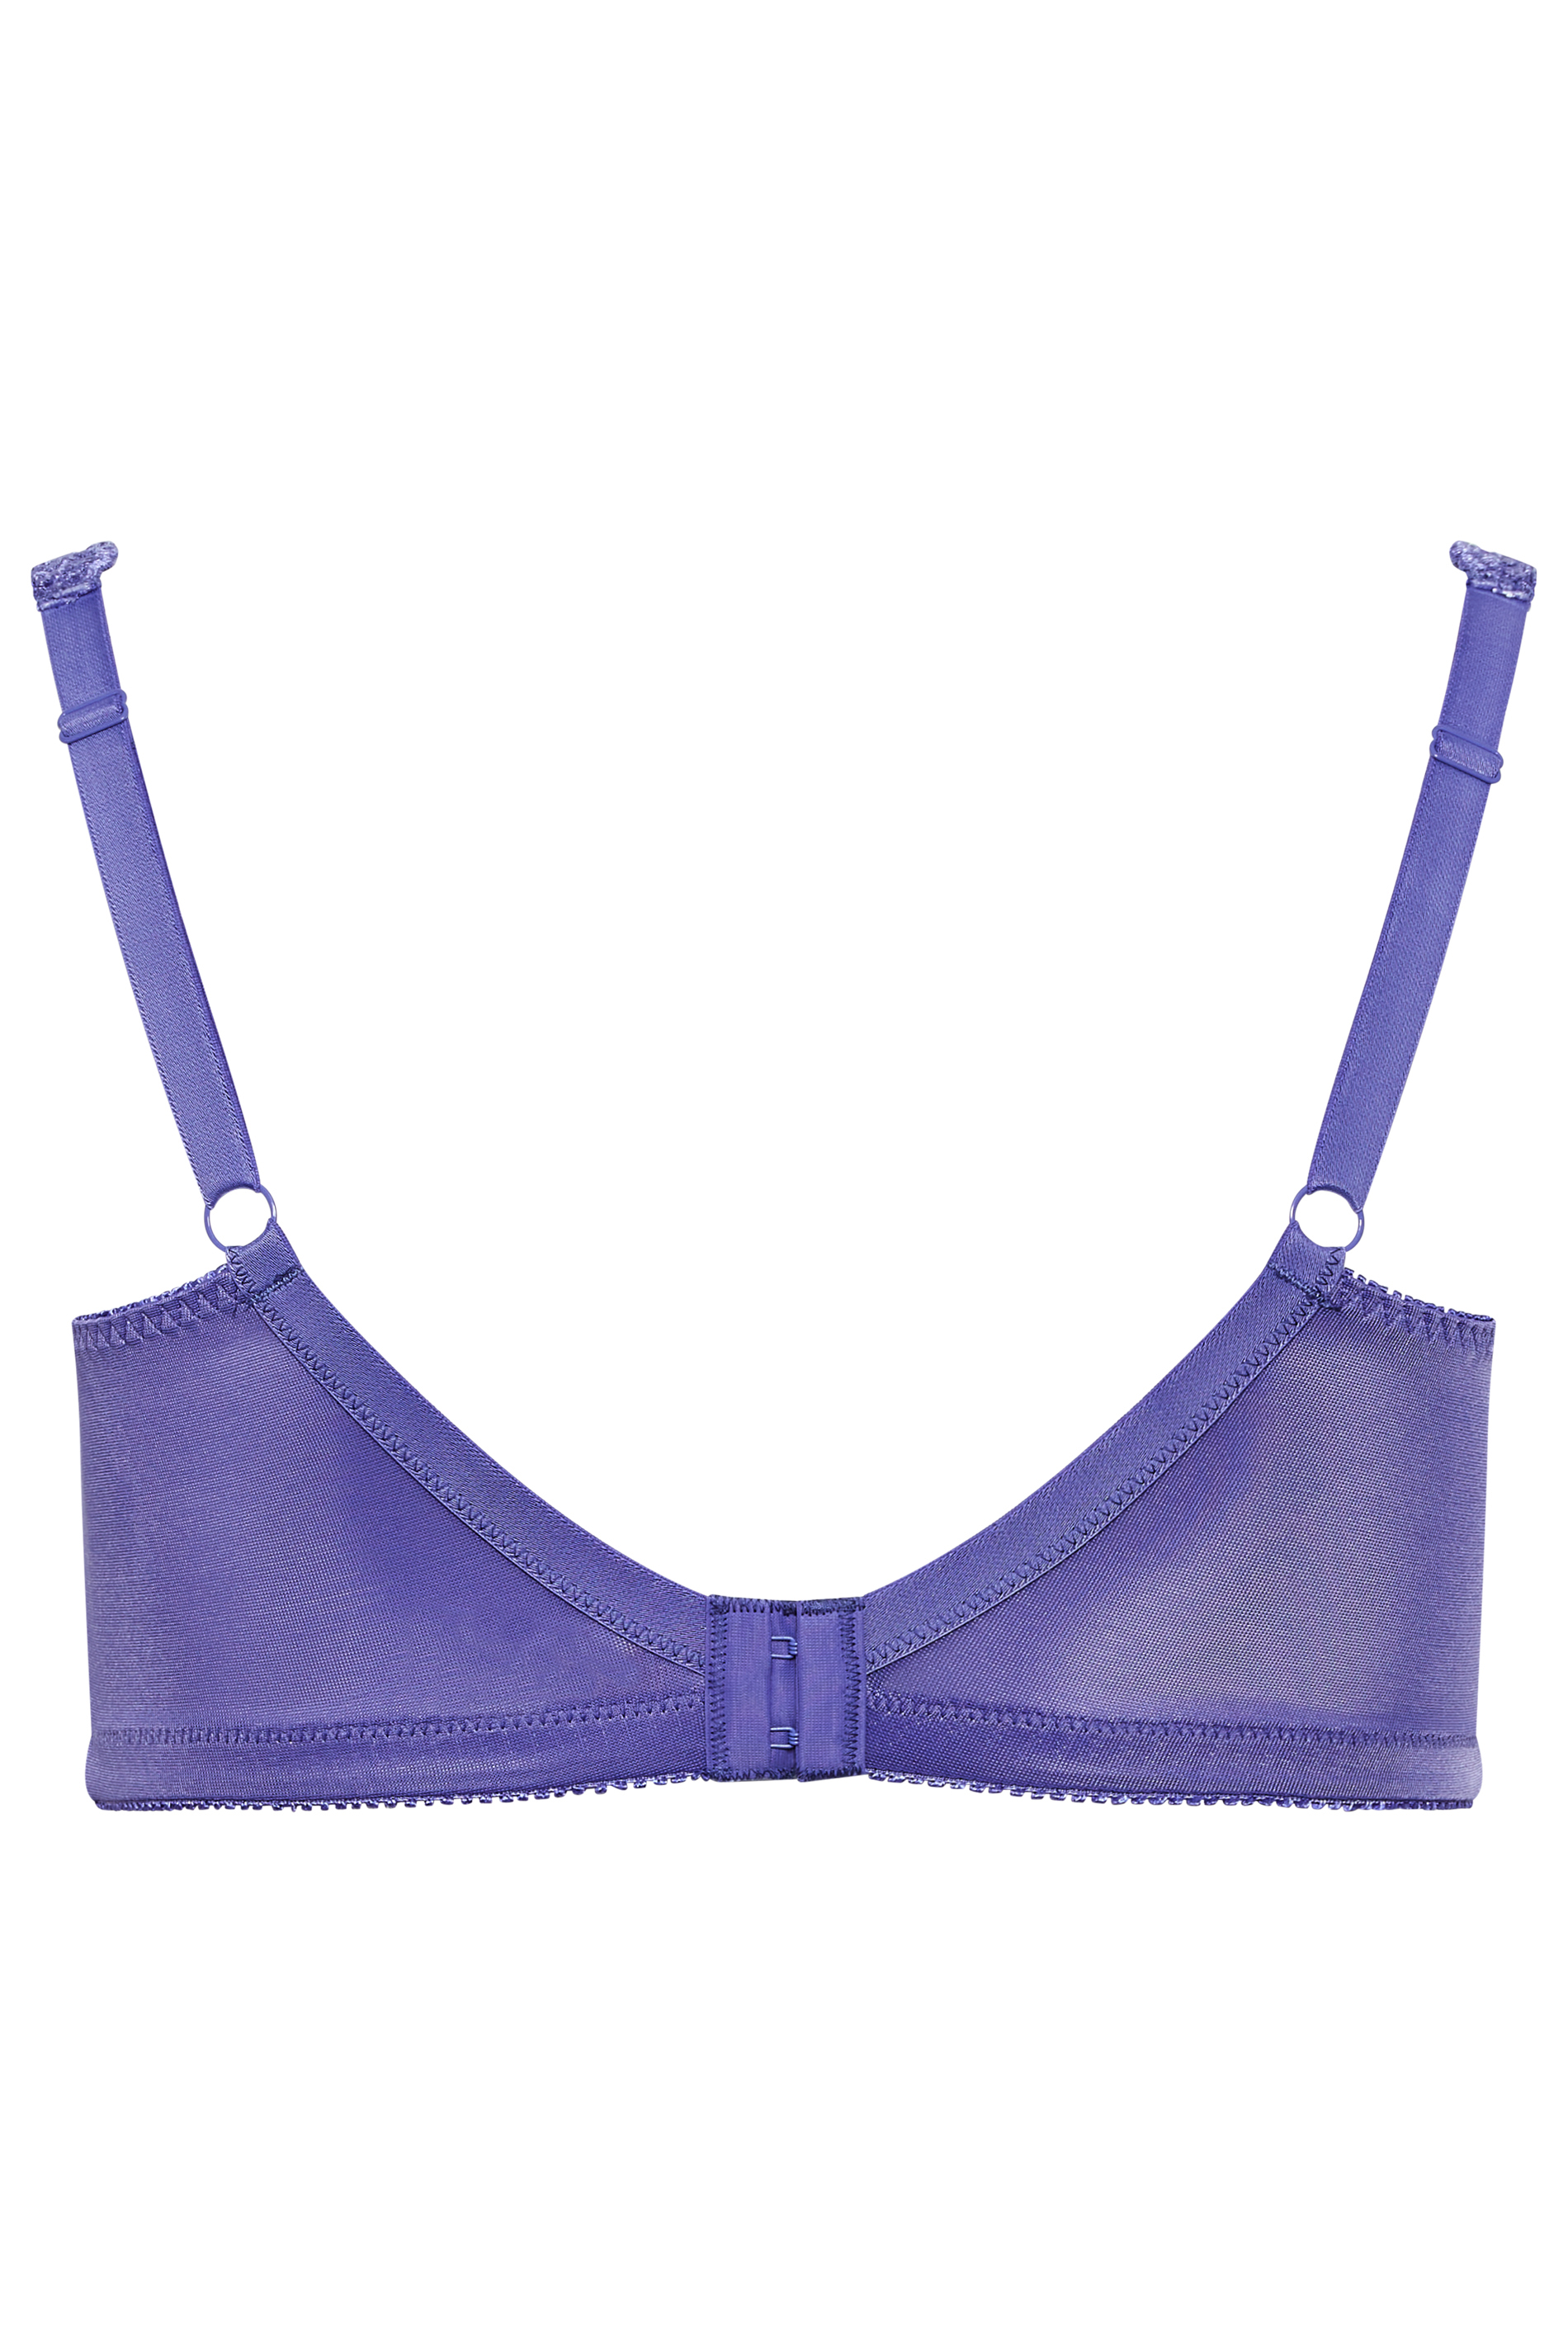 YOURS Plus Size Purple Hi Shine Lace Non-Padded Non-Wired Full Cup Bra ...